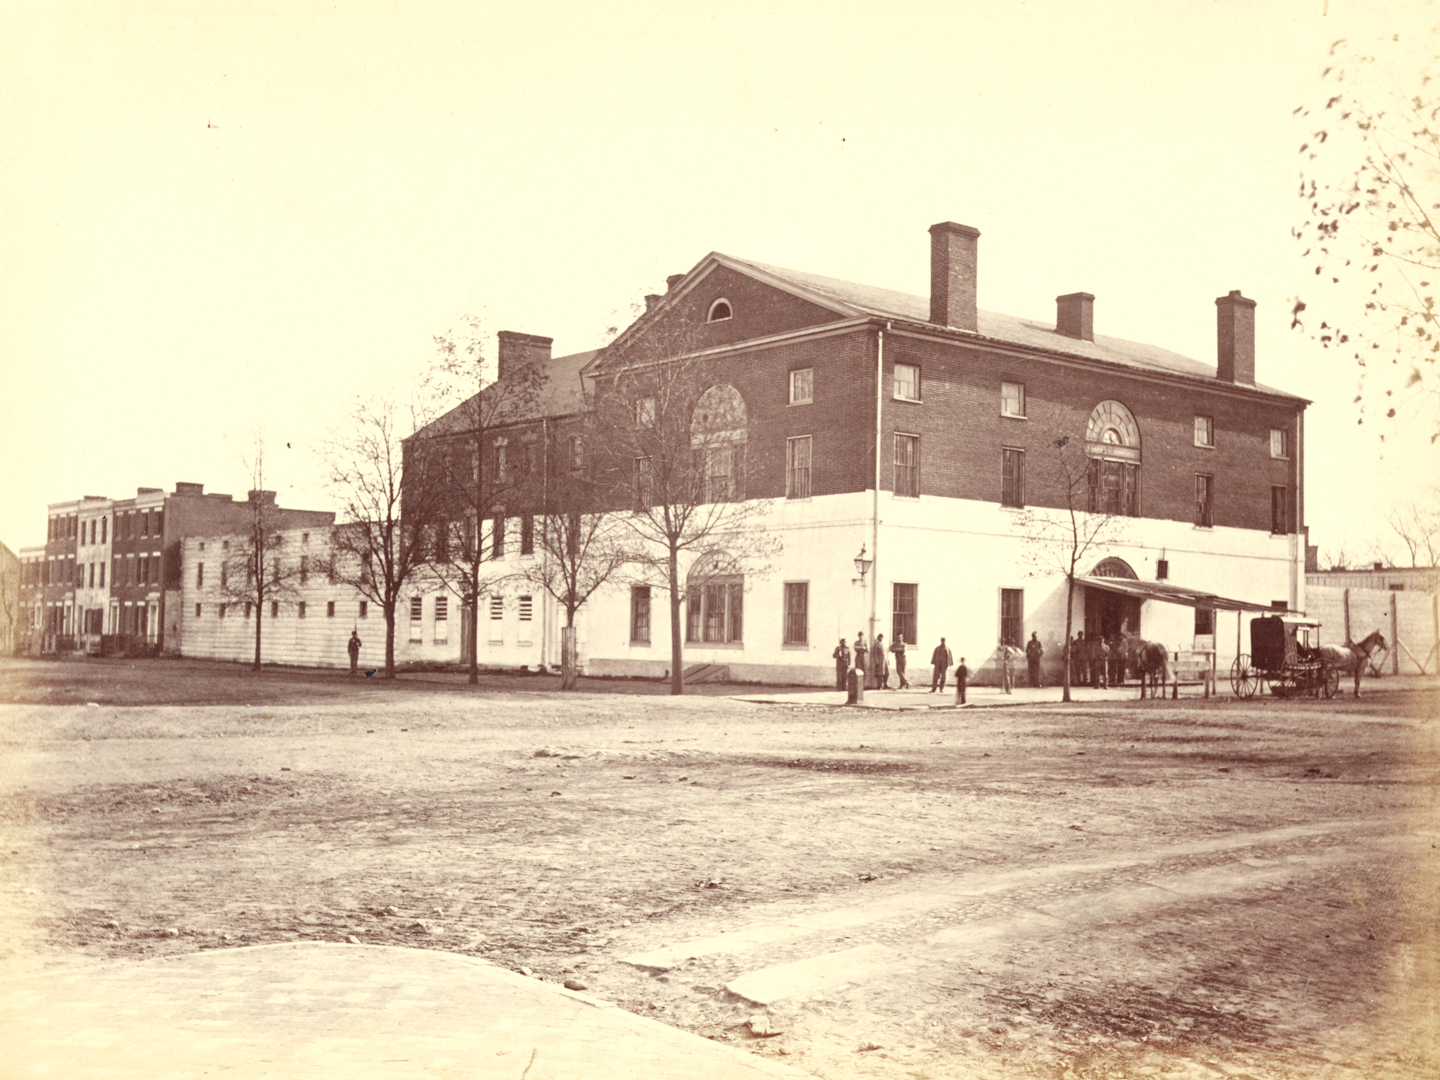 Sepia-toned photograph of three-story brick building with gabled roof and chimneys. Bottom half of building painted white, rest of building dark brick. Awning at front entrance, with people standing around front door.